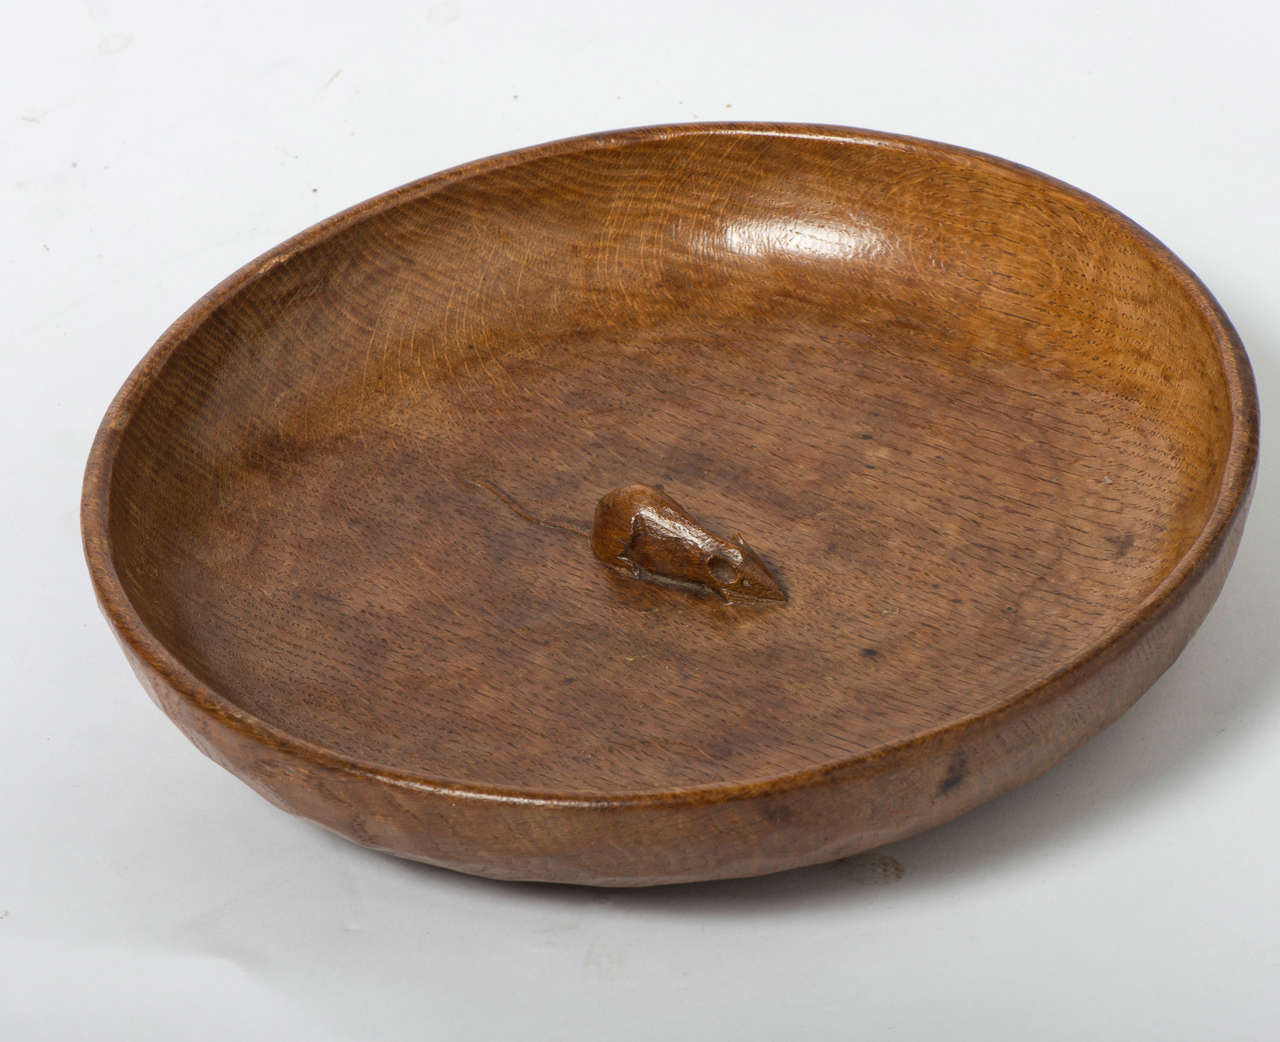 Carved Robert “Mouseman” Thompson Oak Fruit Bowl with Adzed Interior and Exterior